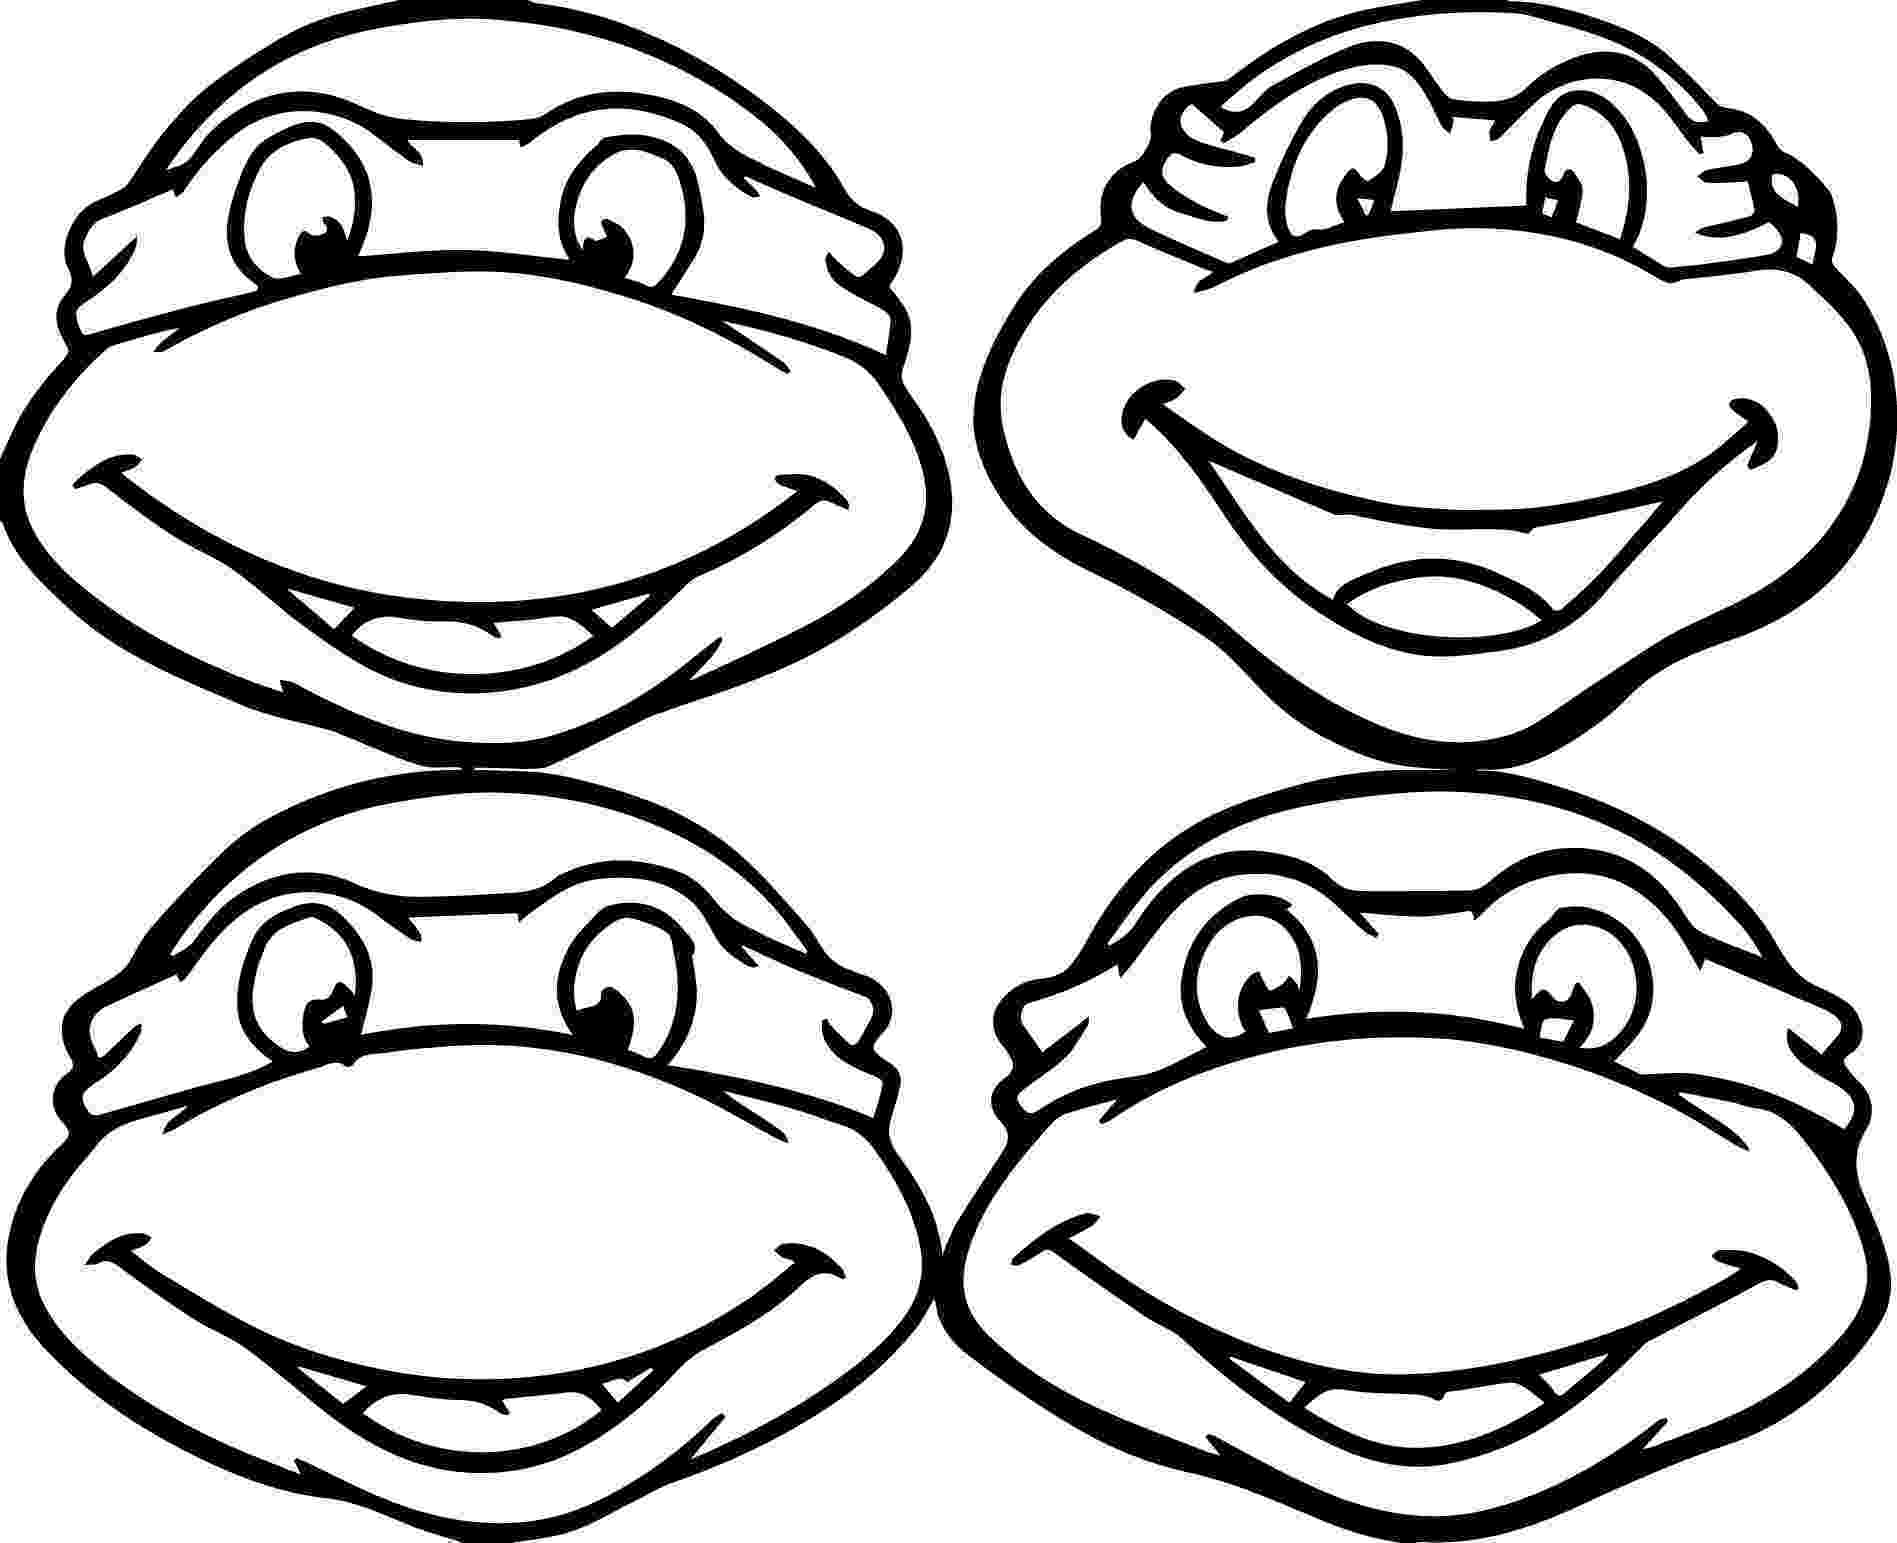 ninja turtle picture to color ninja turtles coloring page characters not disney ninja to turtle picture color 